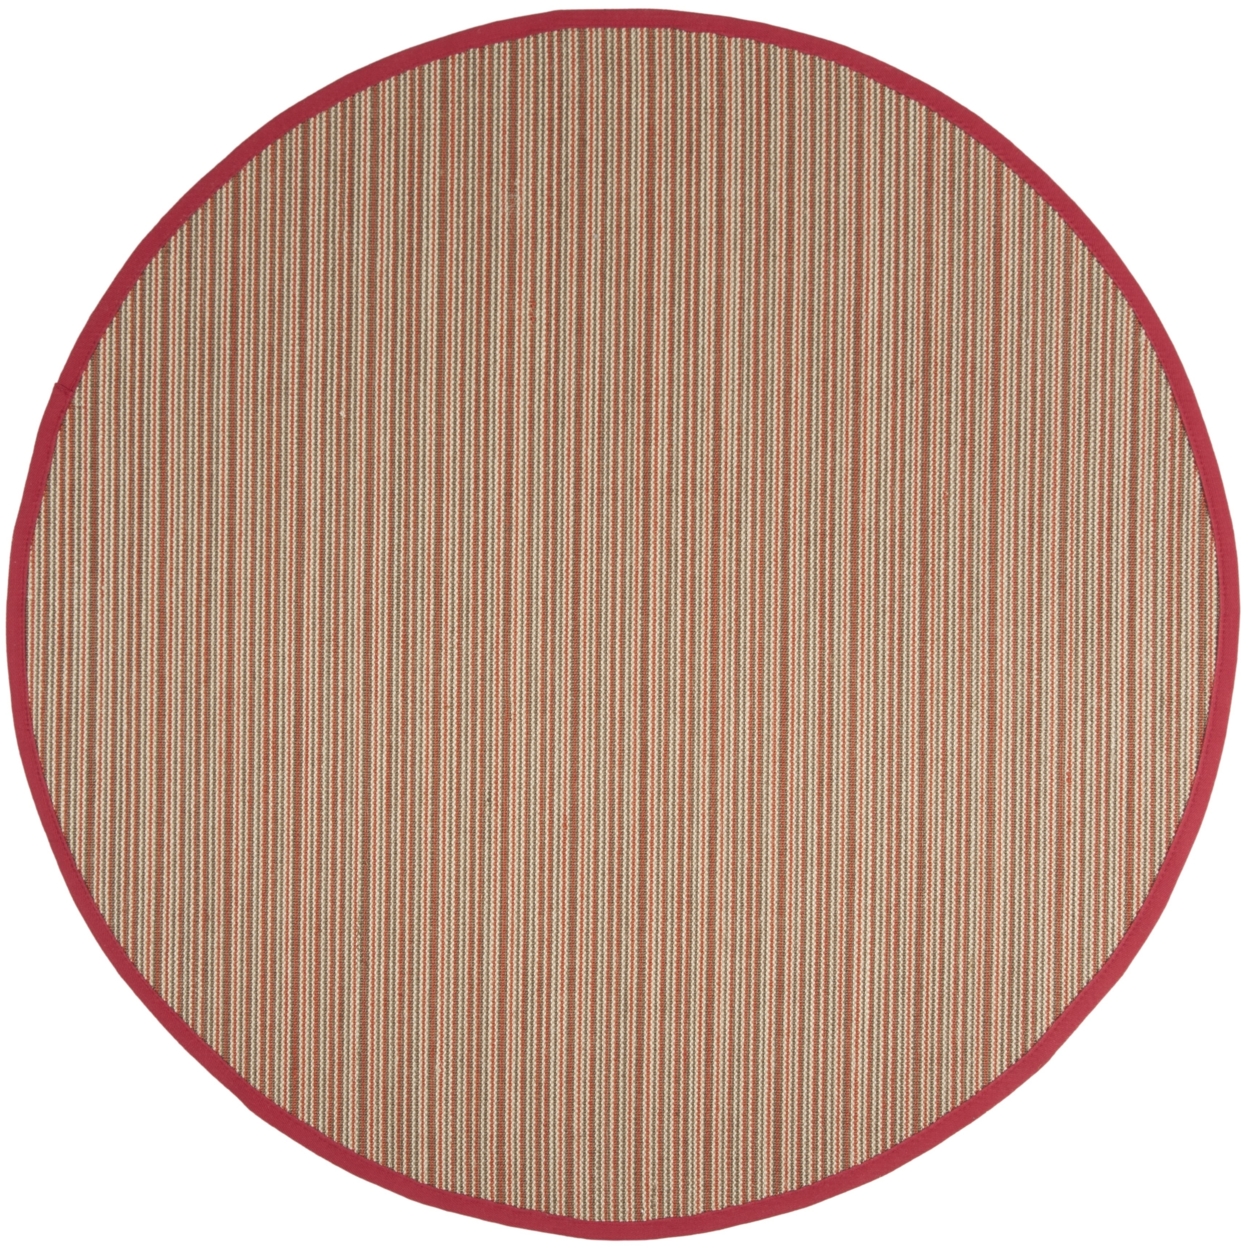 SAFAVIEH Natural Fiber Collection NF132B Brown / Red Rug - 6' Round